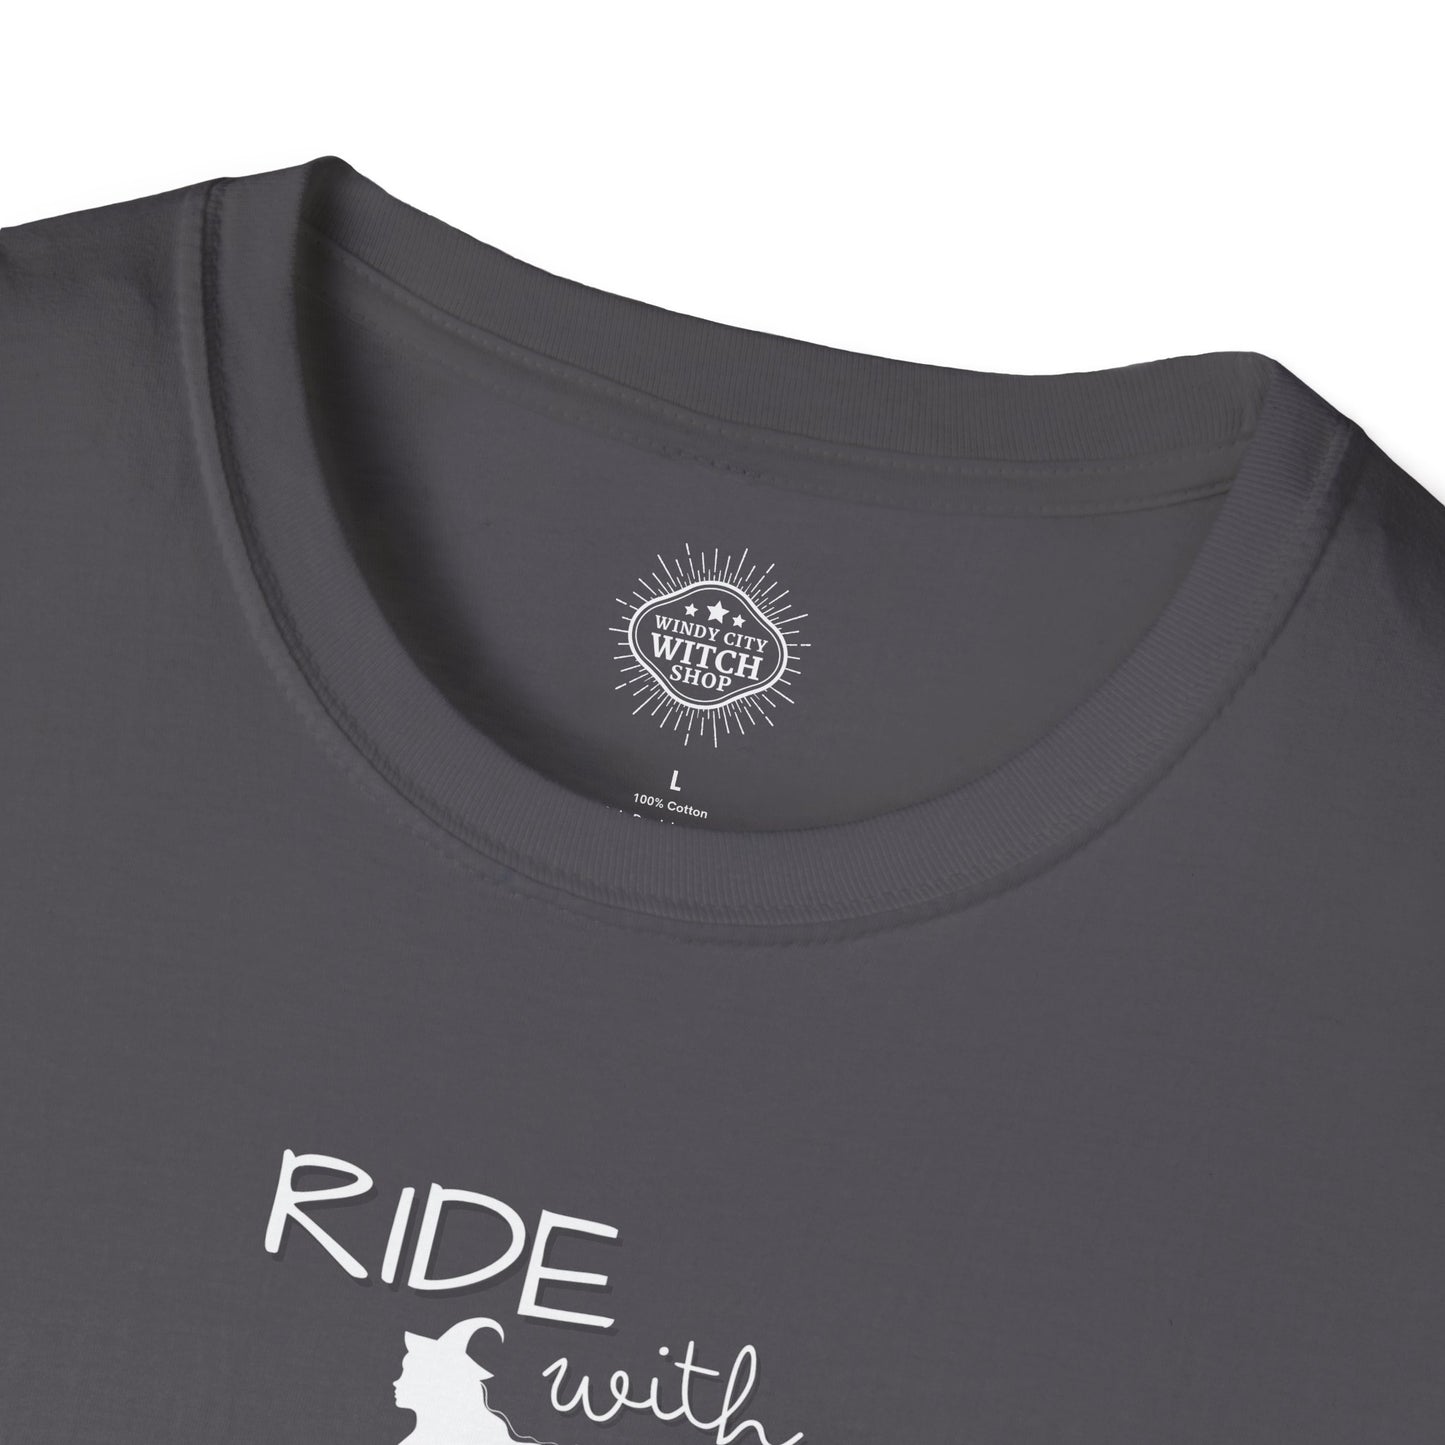 Ride with Pride T-Shirt